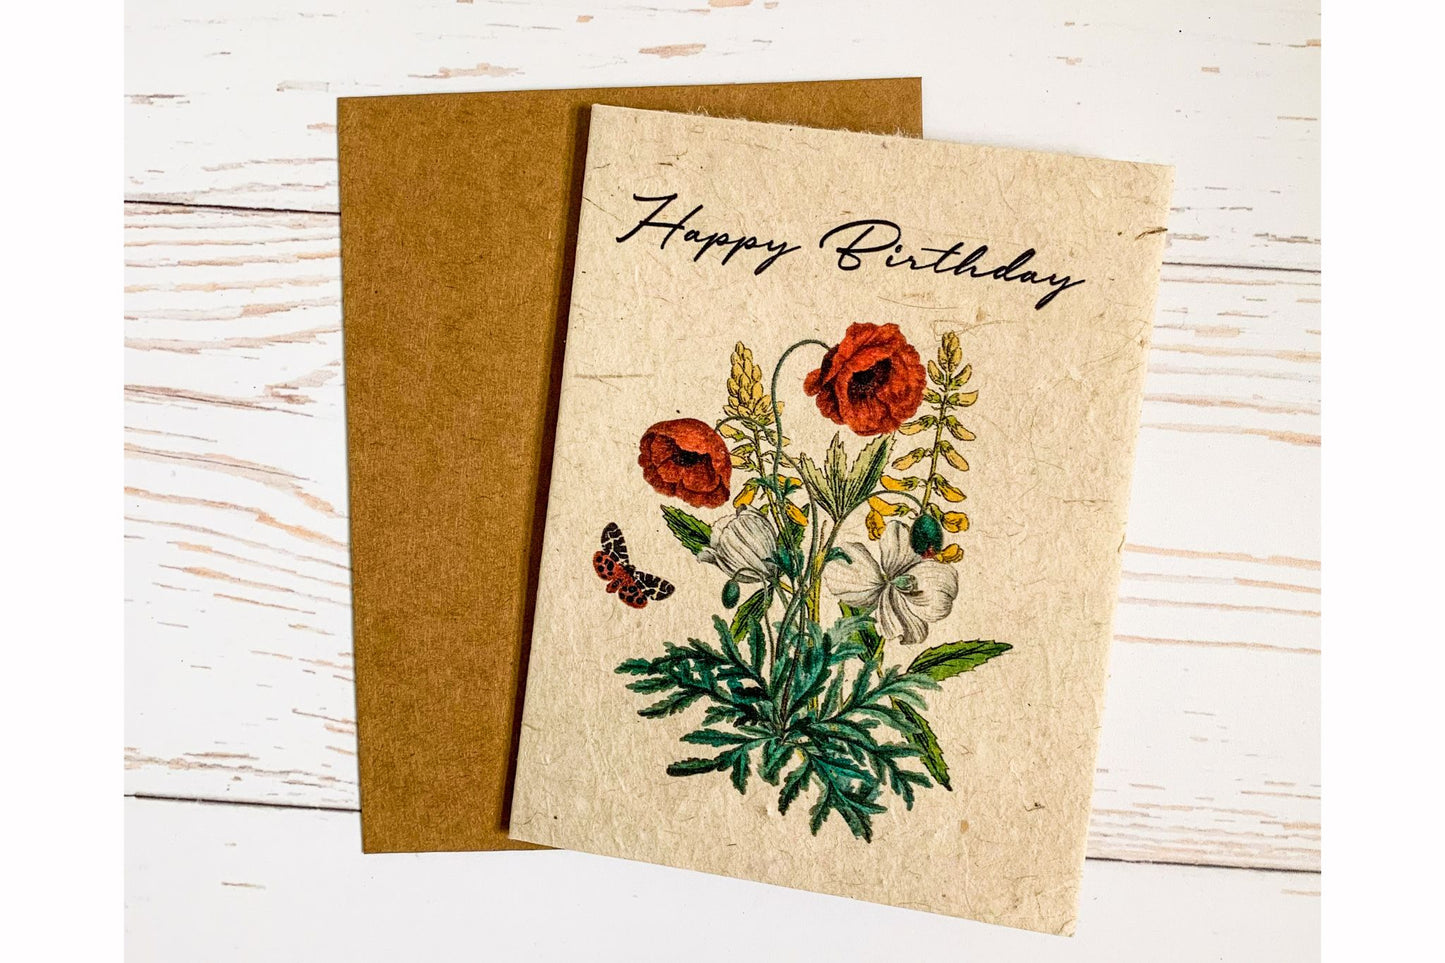 Plantable Flower Seed Paper Birthday Cards, Eco Friendly Cards, Wildflower Seed Paper, Zero Waste Botanical Cards, - Helen Jeanne 